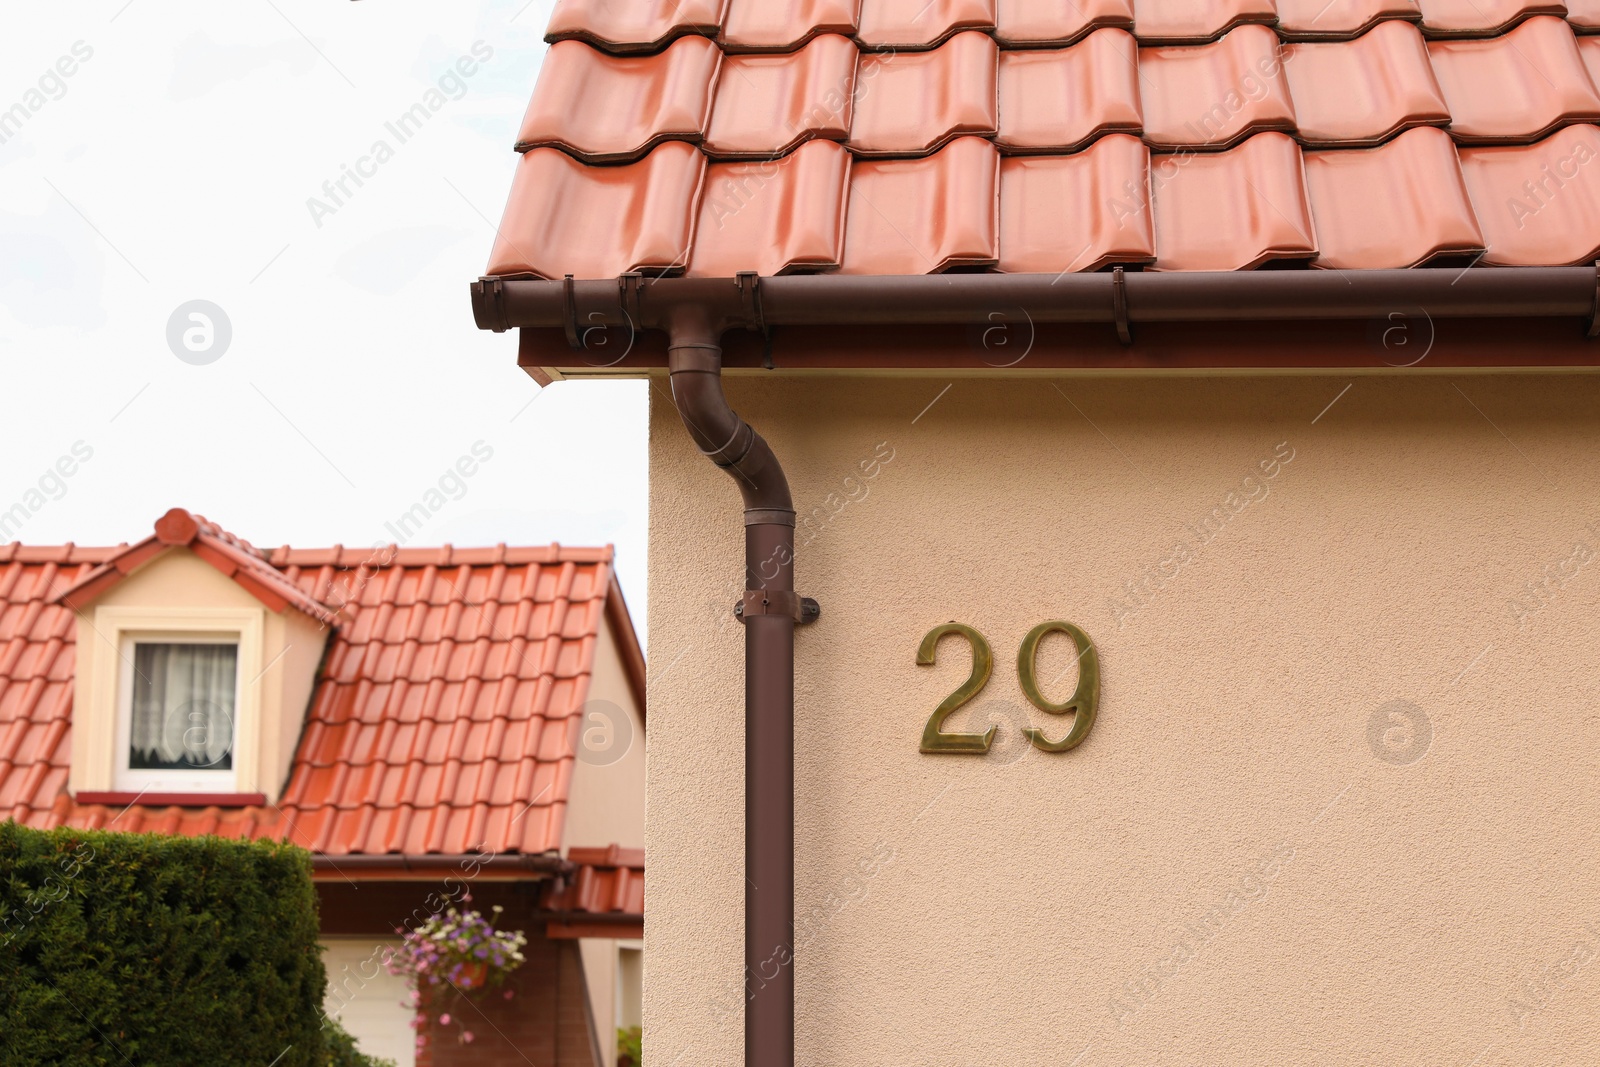 Photo of Number 29 on textured house wall outdoors